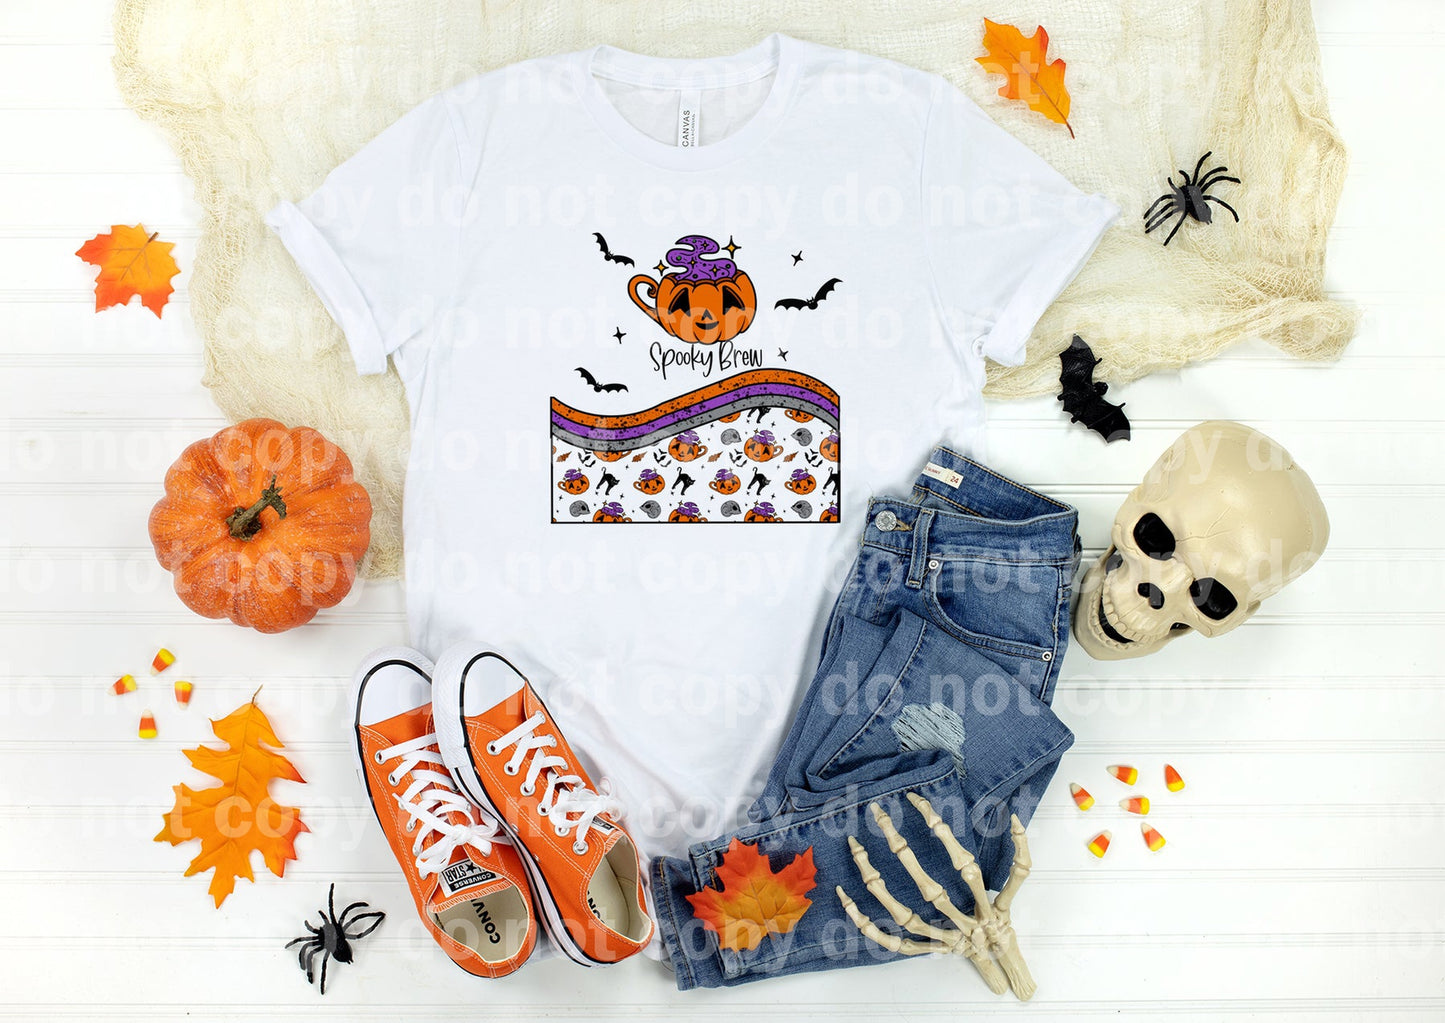 Spooky Brew Dream Print or Sublimation Print